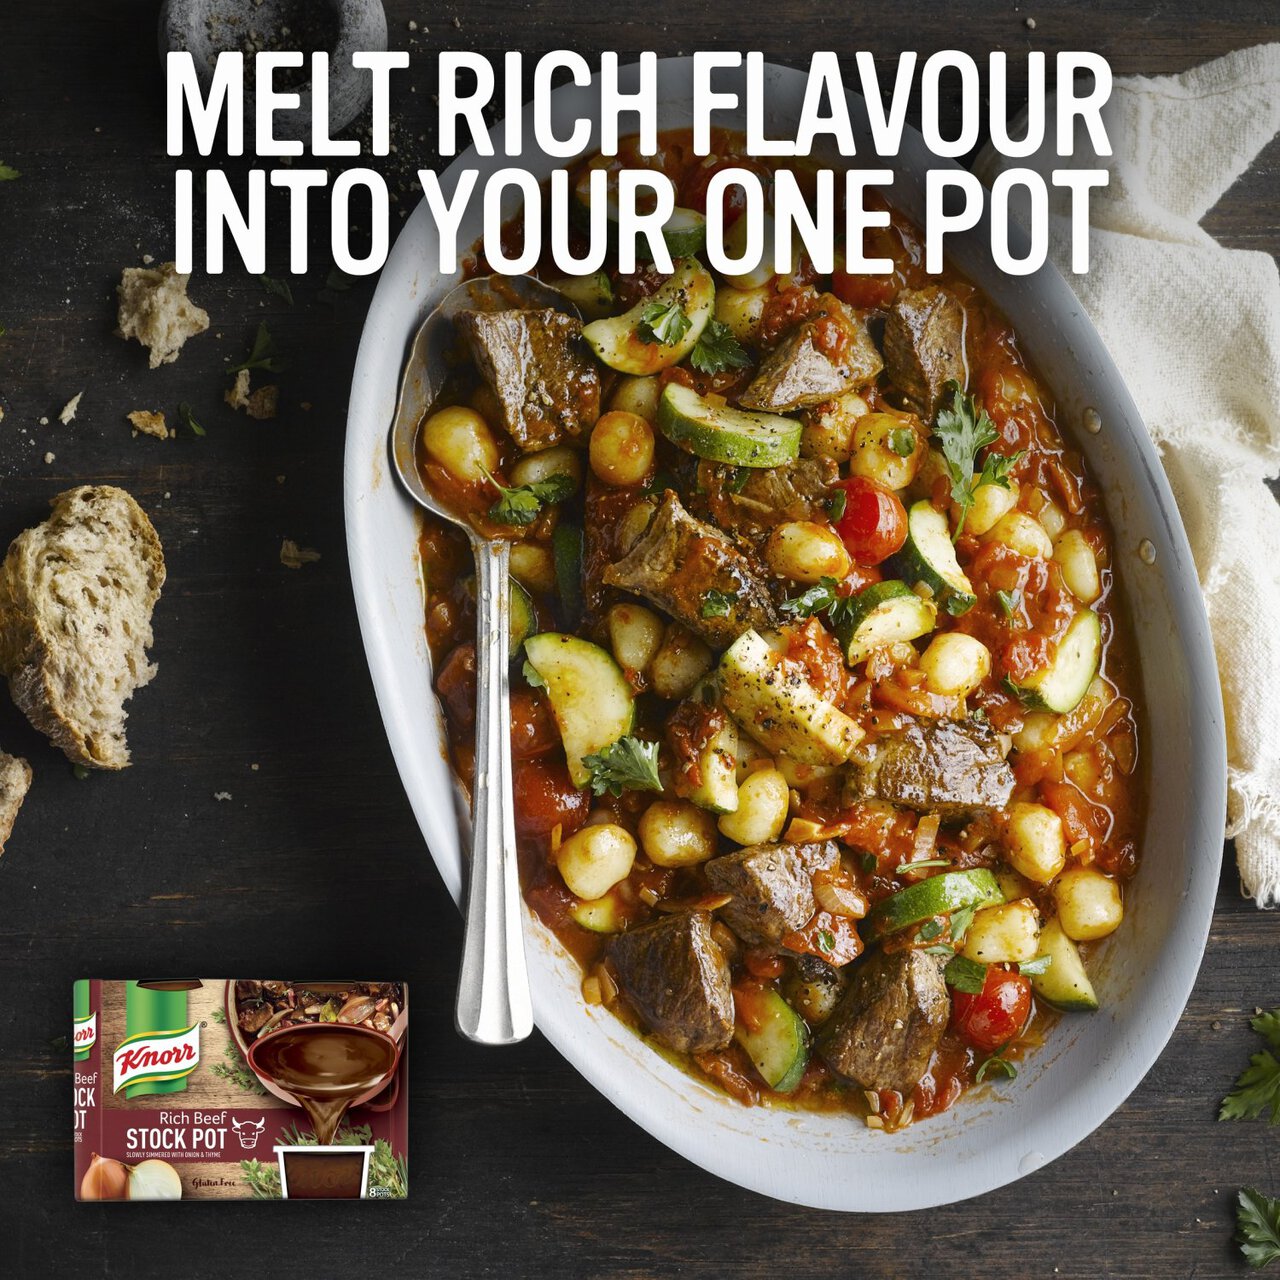 Knorr 8 Rich Beef Stock Pot 8 x 28g